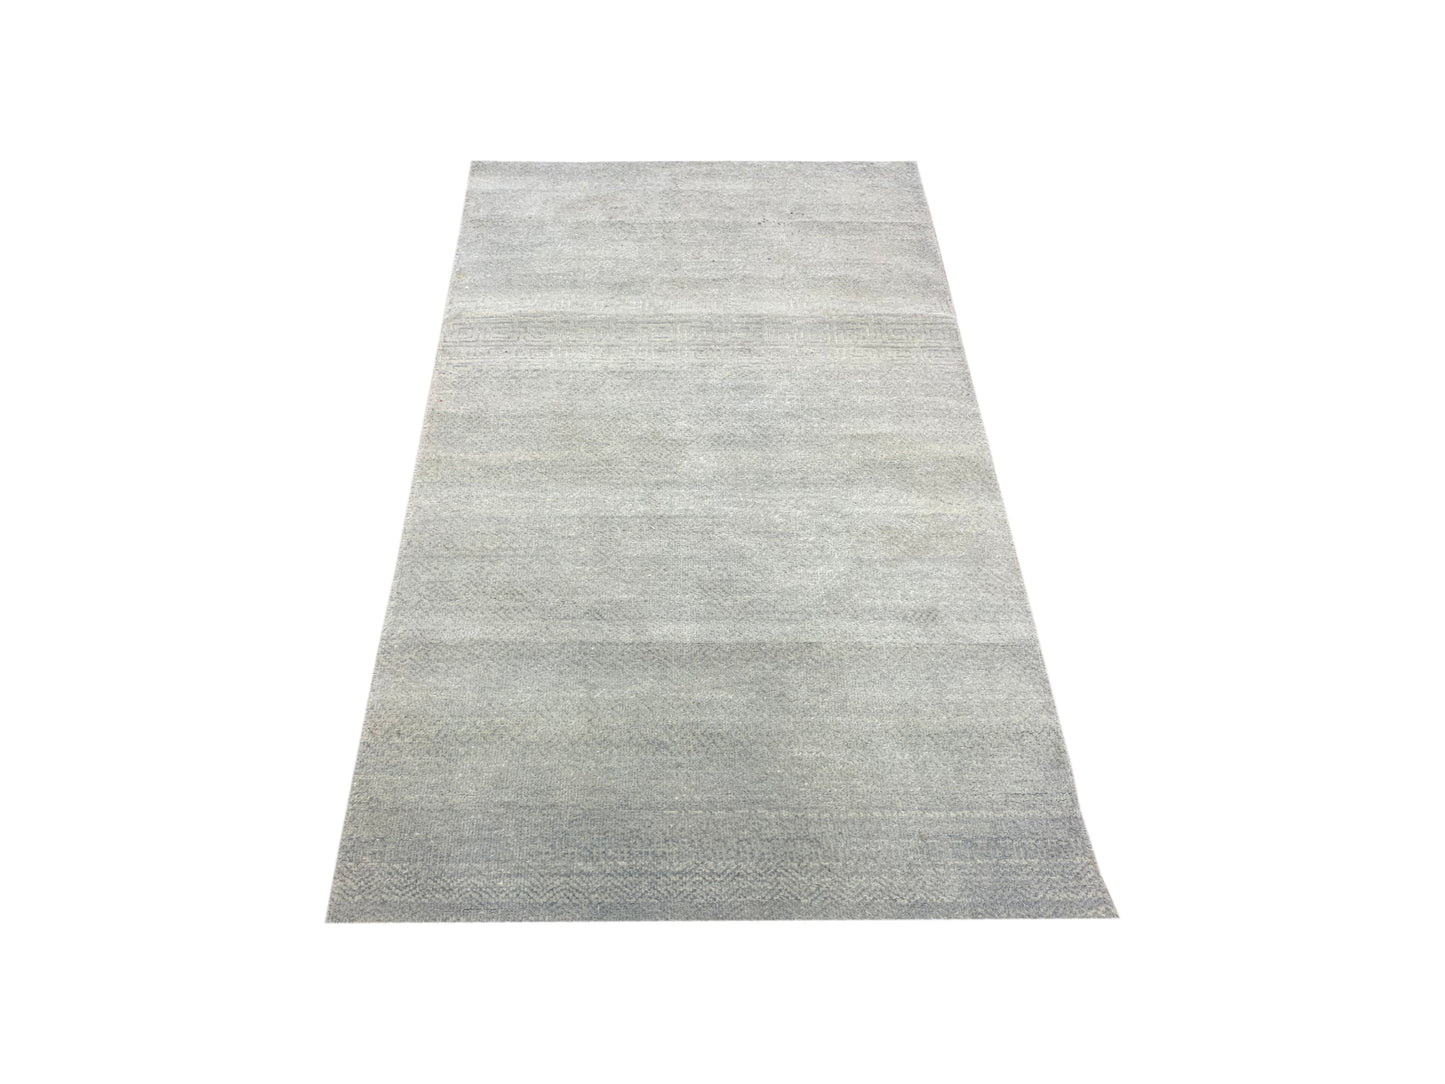 Get trendy with Grey Viscose Wool Modern Handknotted Area Rug 2.11x5.3ft 89x161Cms - Modern Rugs available at Jaipur Oriental Rugs. Grab yours for $645.00 today!